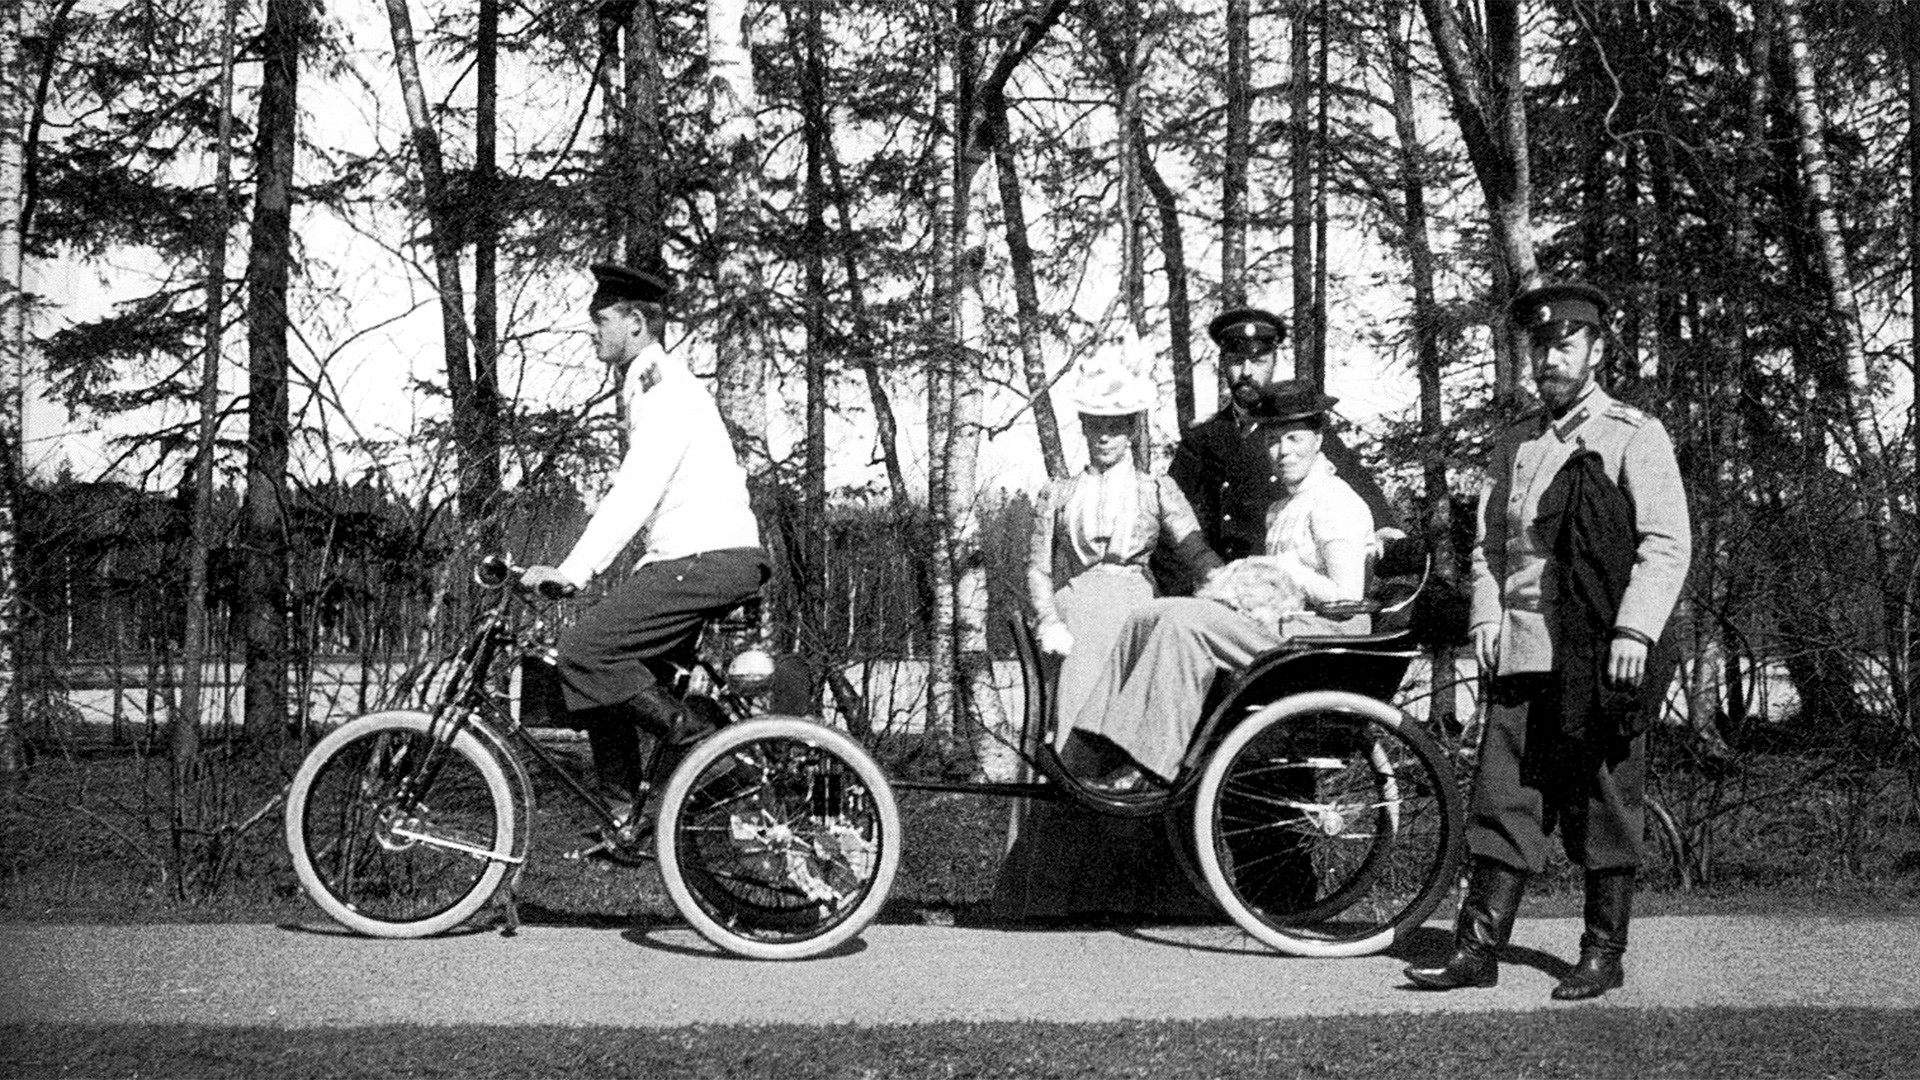  Emperor Nicholas II and his family enjoying an afternoon walk.